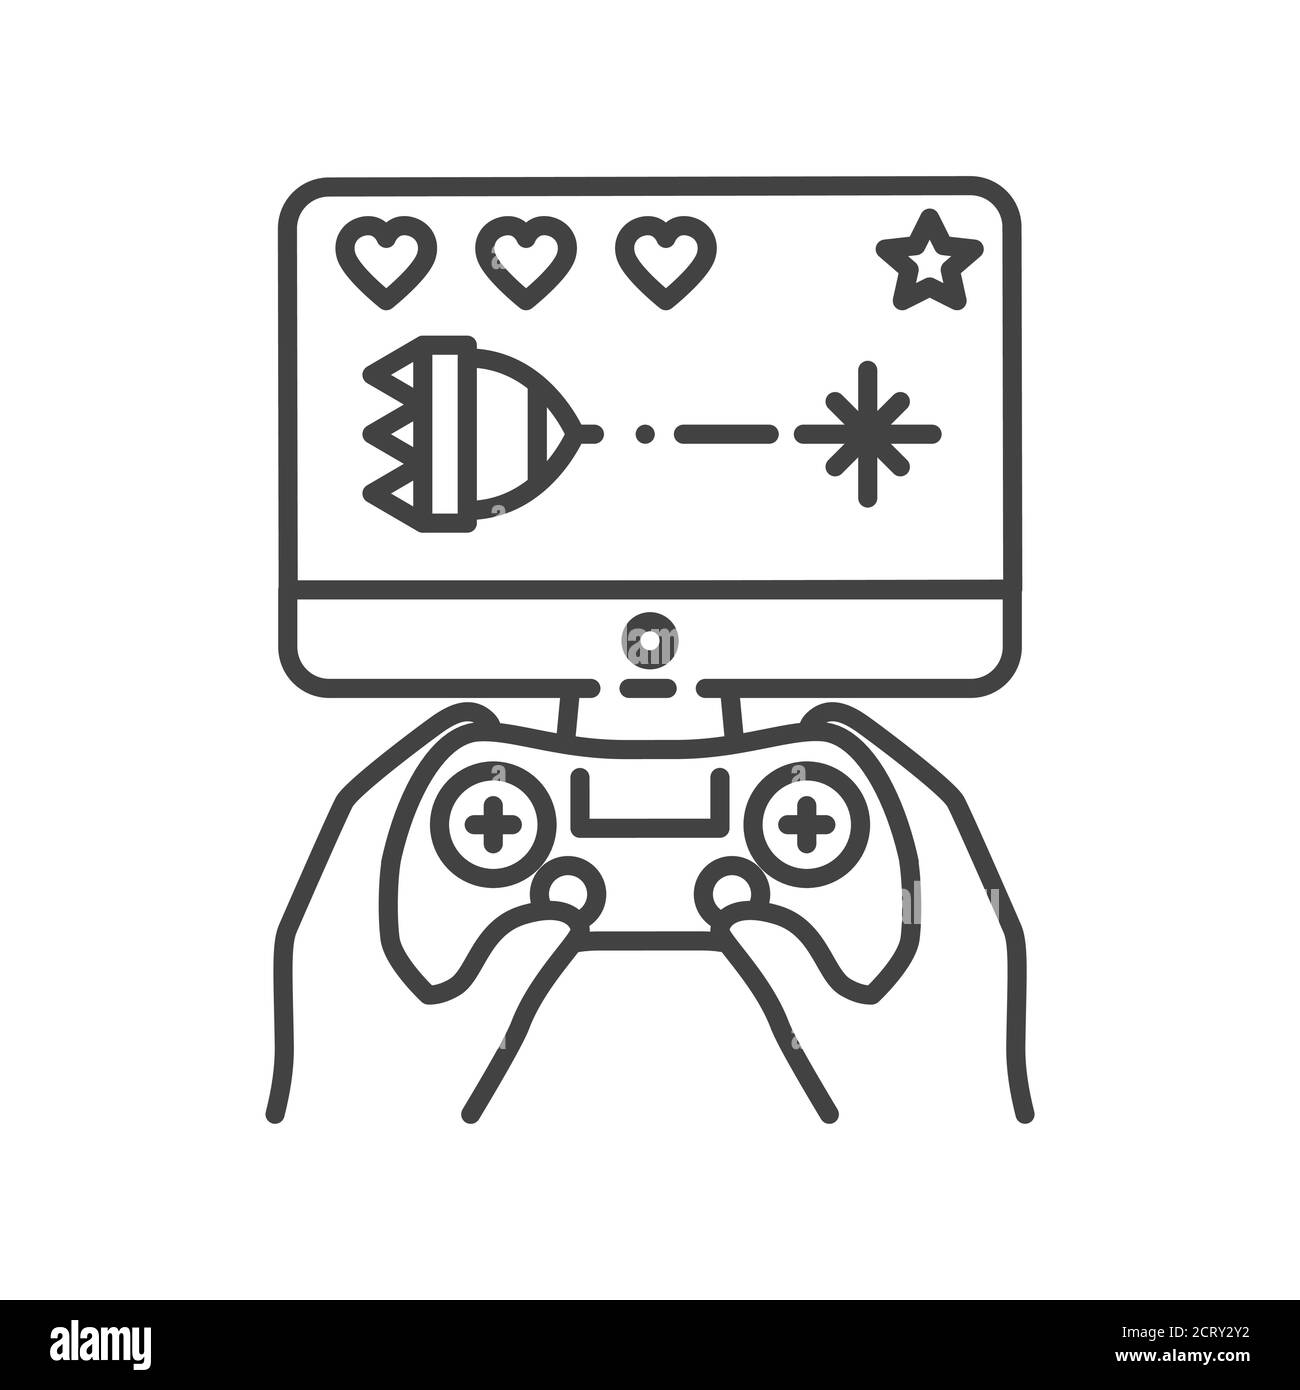 computer games clipart black and white